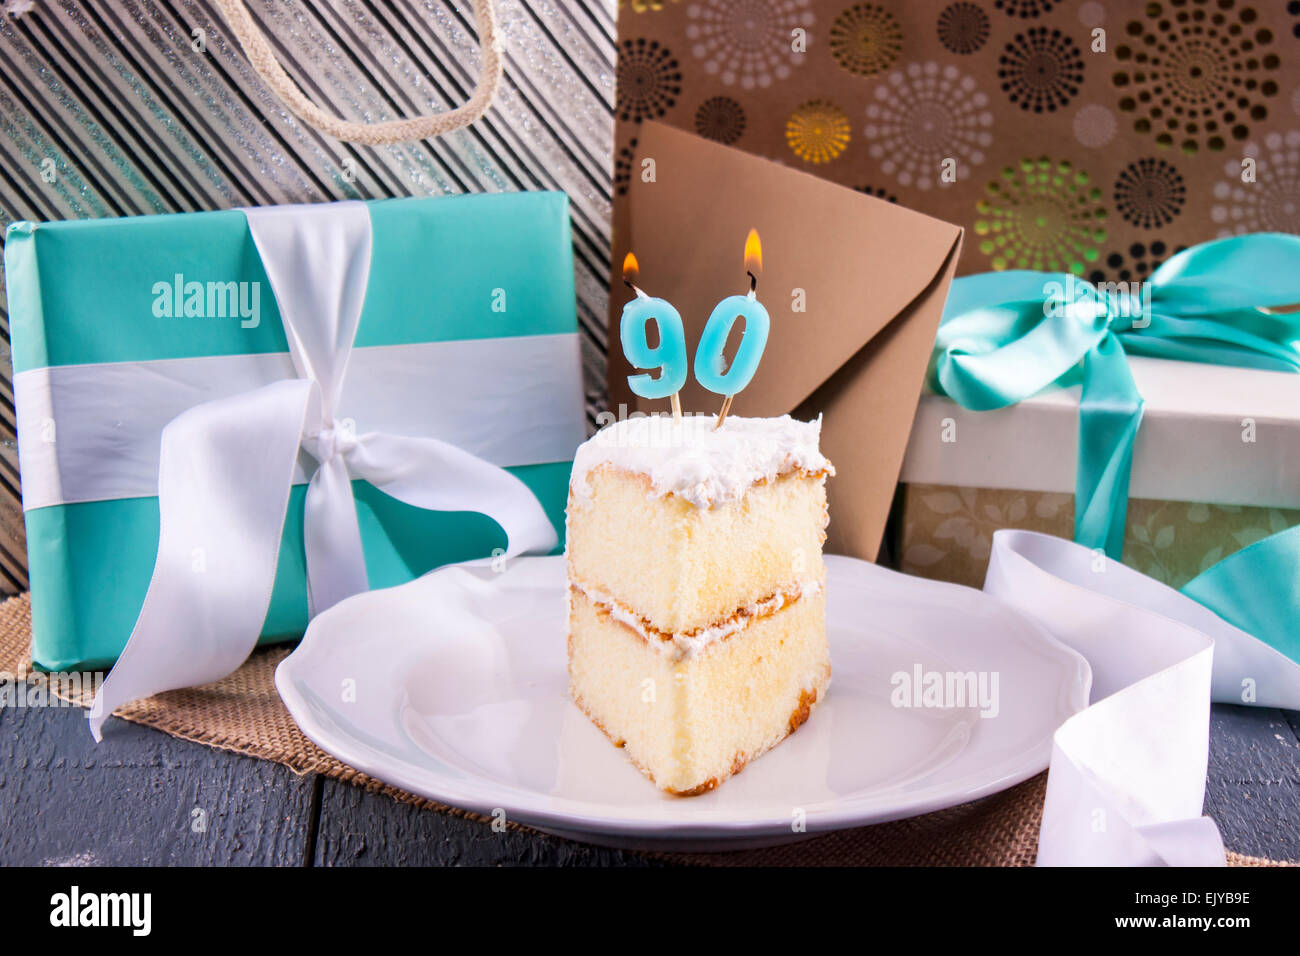 Slice of birthday cake with '90' candle for ninetieth birthday placed with gifts and cards. Stock Photo